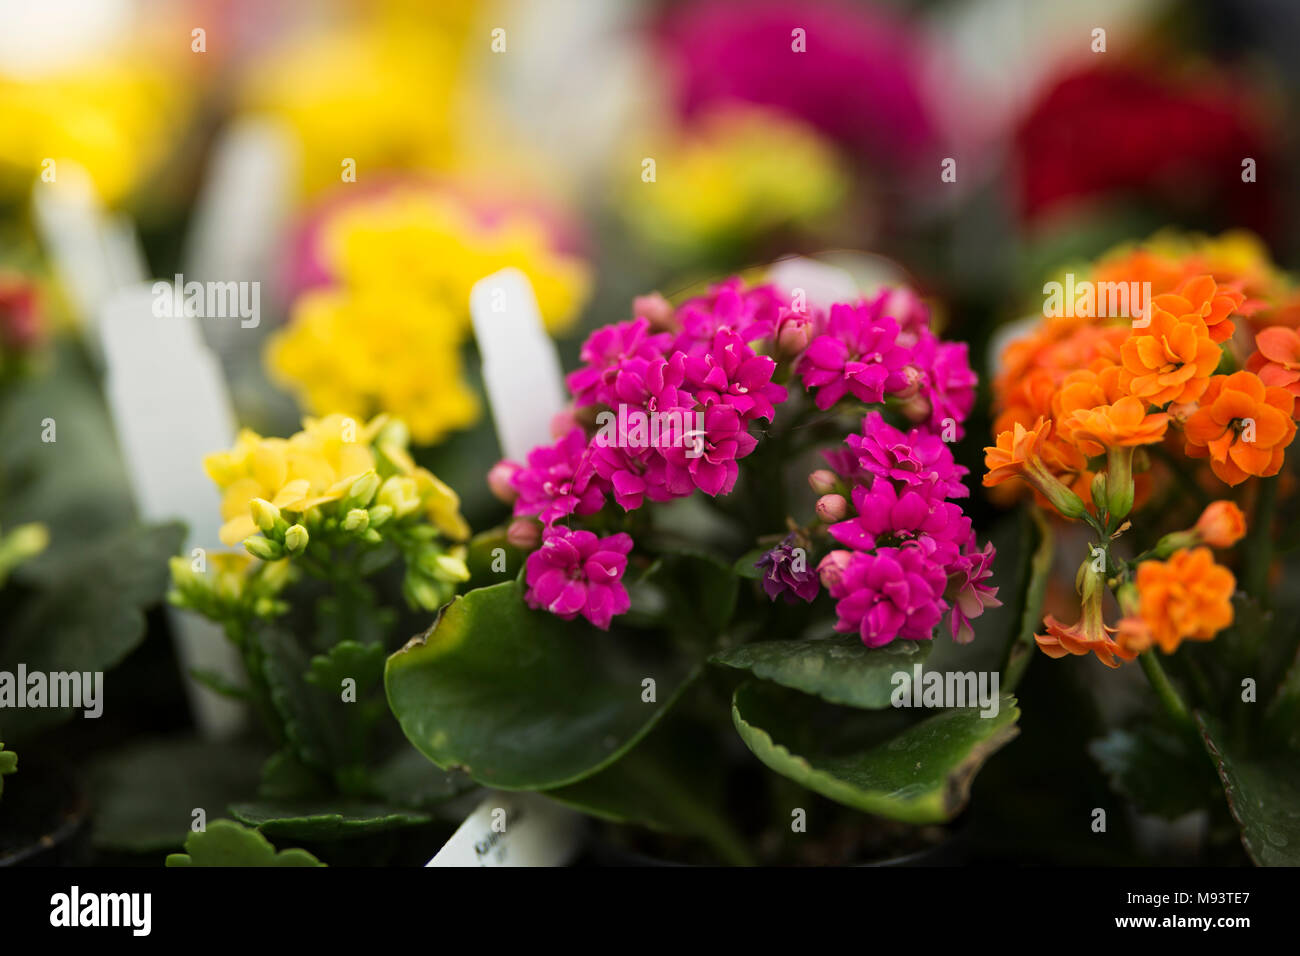 A colorful display of primroses (primula) in a nursery. Stock Photo